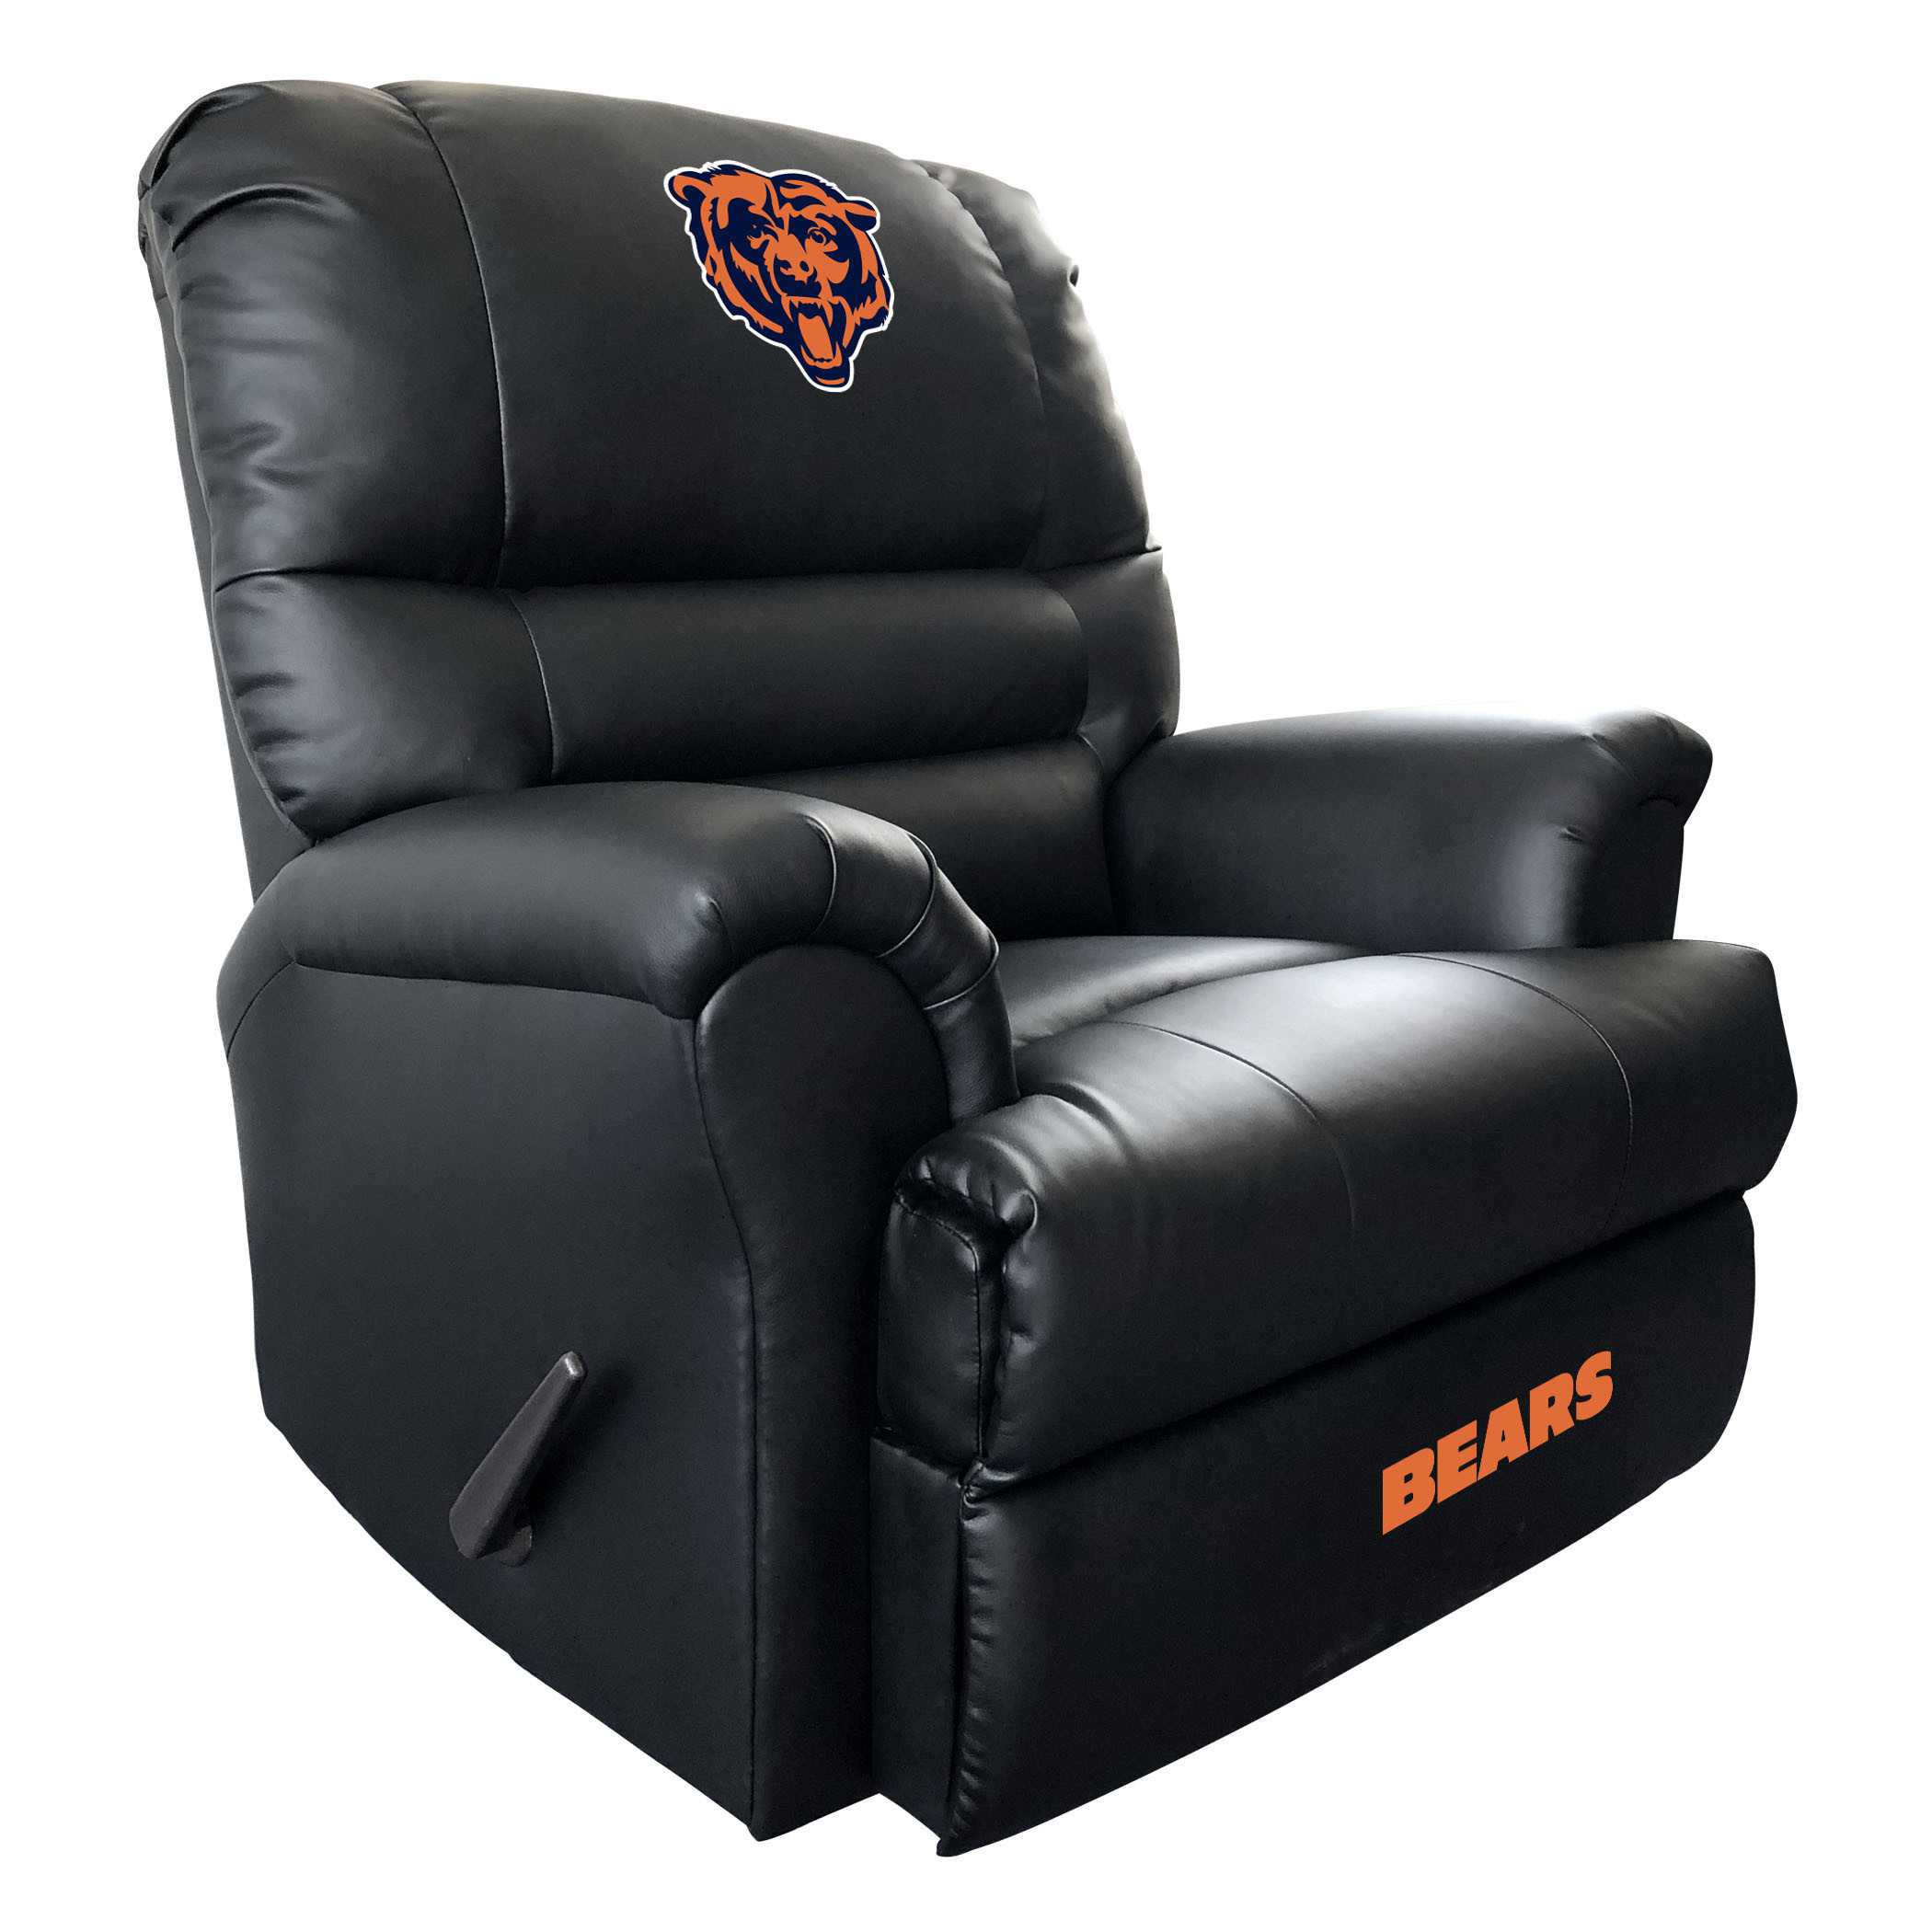 CHICAGO BEARS SPORTS RECLINER